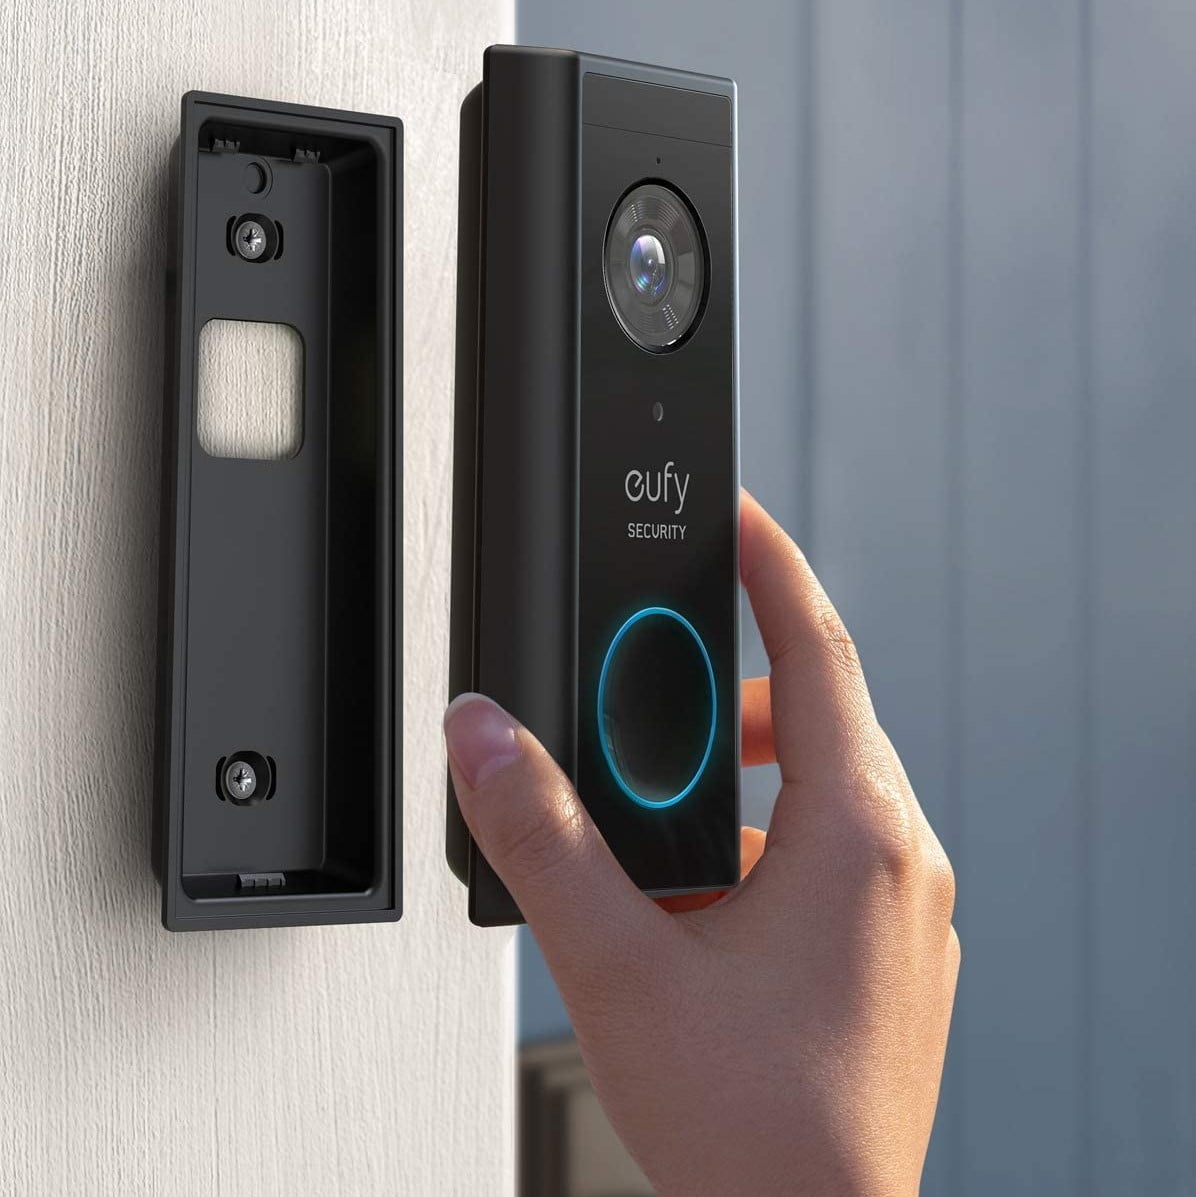 71U65Fppgql. Ac Sl1500 Eufy &Lt;H1 Class=&Quot;Product-Meta__Title Heading H1&Quot;&Gt;Eufy Security Wireless Video Doorbell 1080P (Battery-Powered)&Lt;/H1&Gt; Https://Www.youtube.com/Watch?V=Na0Okqzlsm8 &Lt;Ul&Gt; &Lt;Li&Gt;&Lt;B&Gt;See Them Arrive In Full Hd&Lt;/B&Gt;: Get A Crisp 1080P-Grade View Of Anyone Who Approaches Your Front Door. The Advanced Wdr And 4:3 Aspect Ratio Ensures You Get A Color Accurate, Head To Toe Image Every Time.&Lt;/Li&Gt; &Lt;Li&Gt;&Lt;B&Gt;120-Day Front Door Security&Lt;/B&Gt;: The Doorbell And Wi-Fi Chime Form A Closed, Low-Power Wireless Connection Allowing For 120 Days Of Flawless Front Door Coverage From A Single Charge.&Lt;/Li&Gt; &Lt;Li&Gt;&Lt;B&Gt;No Subscription Required&Lt;/B&Gt;: Designed To Protect Your Home As Well As Your Wallet, Eufy Security Products Are One-Time Purchases That Combine Security With Convenience.&Lt;/Li&Gt; &Lt;Li&Gt;&Lt;B&Gt;Slim, Sleek, And Easy To Set Up&Lt;/B&Gt;: Installation Can Be Completed In Minutes And Without The Hassle Of Complicated Wiring. The Slim Design Ensures It Can Fit Seamlessly Onto Any Doorframe.&Lt;/Li&Gt; &Lt;Li&Gt;&Lt;B&Gt;Your Data Securely Stored&Lt;/B&Gt;: Every Moment Captured Is Stored Locally On The Wi-Fi Doorbell Chime Inside Your Home Via Advanced Encryption.&Lt;/Li&Gt; &Lt;/Ul&Gt; &Lt;H5&Gt;Note : Base Station Not Included&Lt;/H5&Gt; Video Doorbell Eufy Security Wireless Video Doorbell 1080P (Battery-Powered)-E8220311